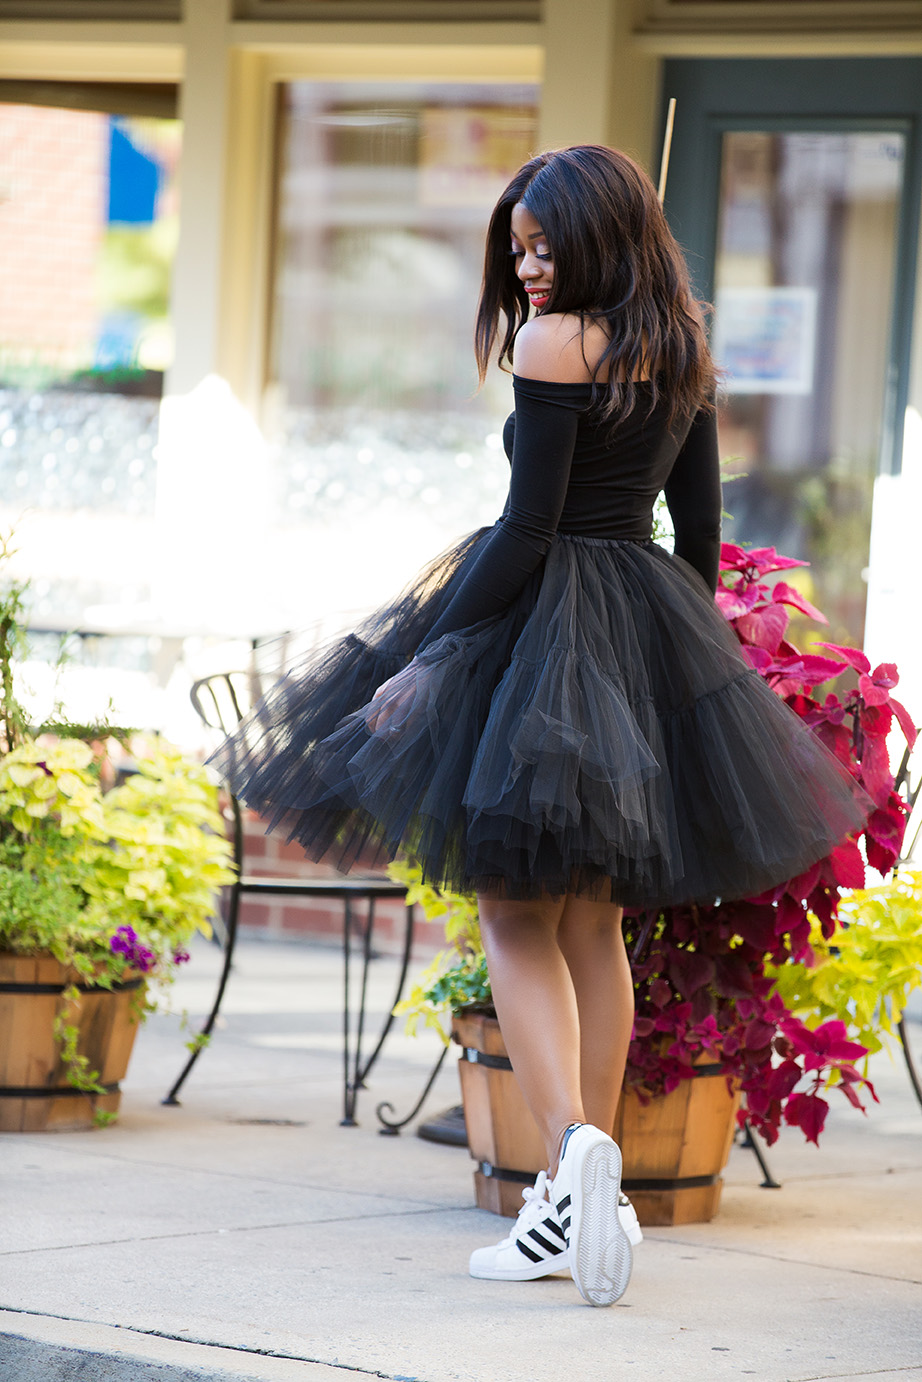 Tulle skirt and sneakers, www.jadore-fashion.com